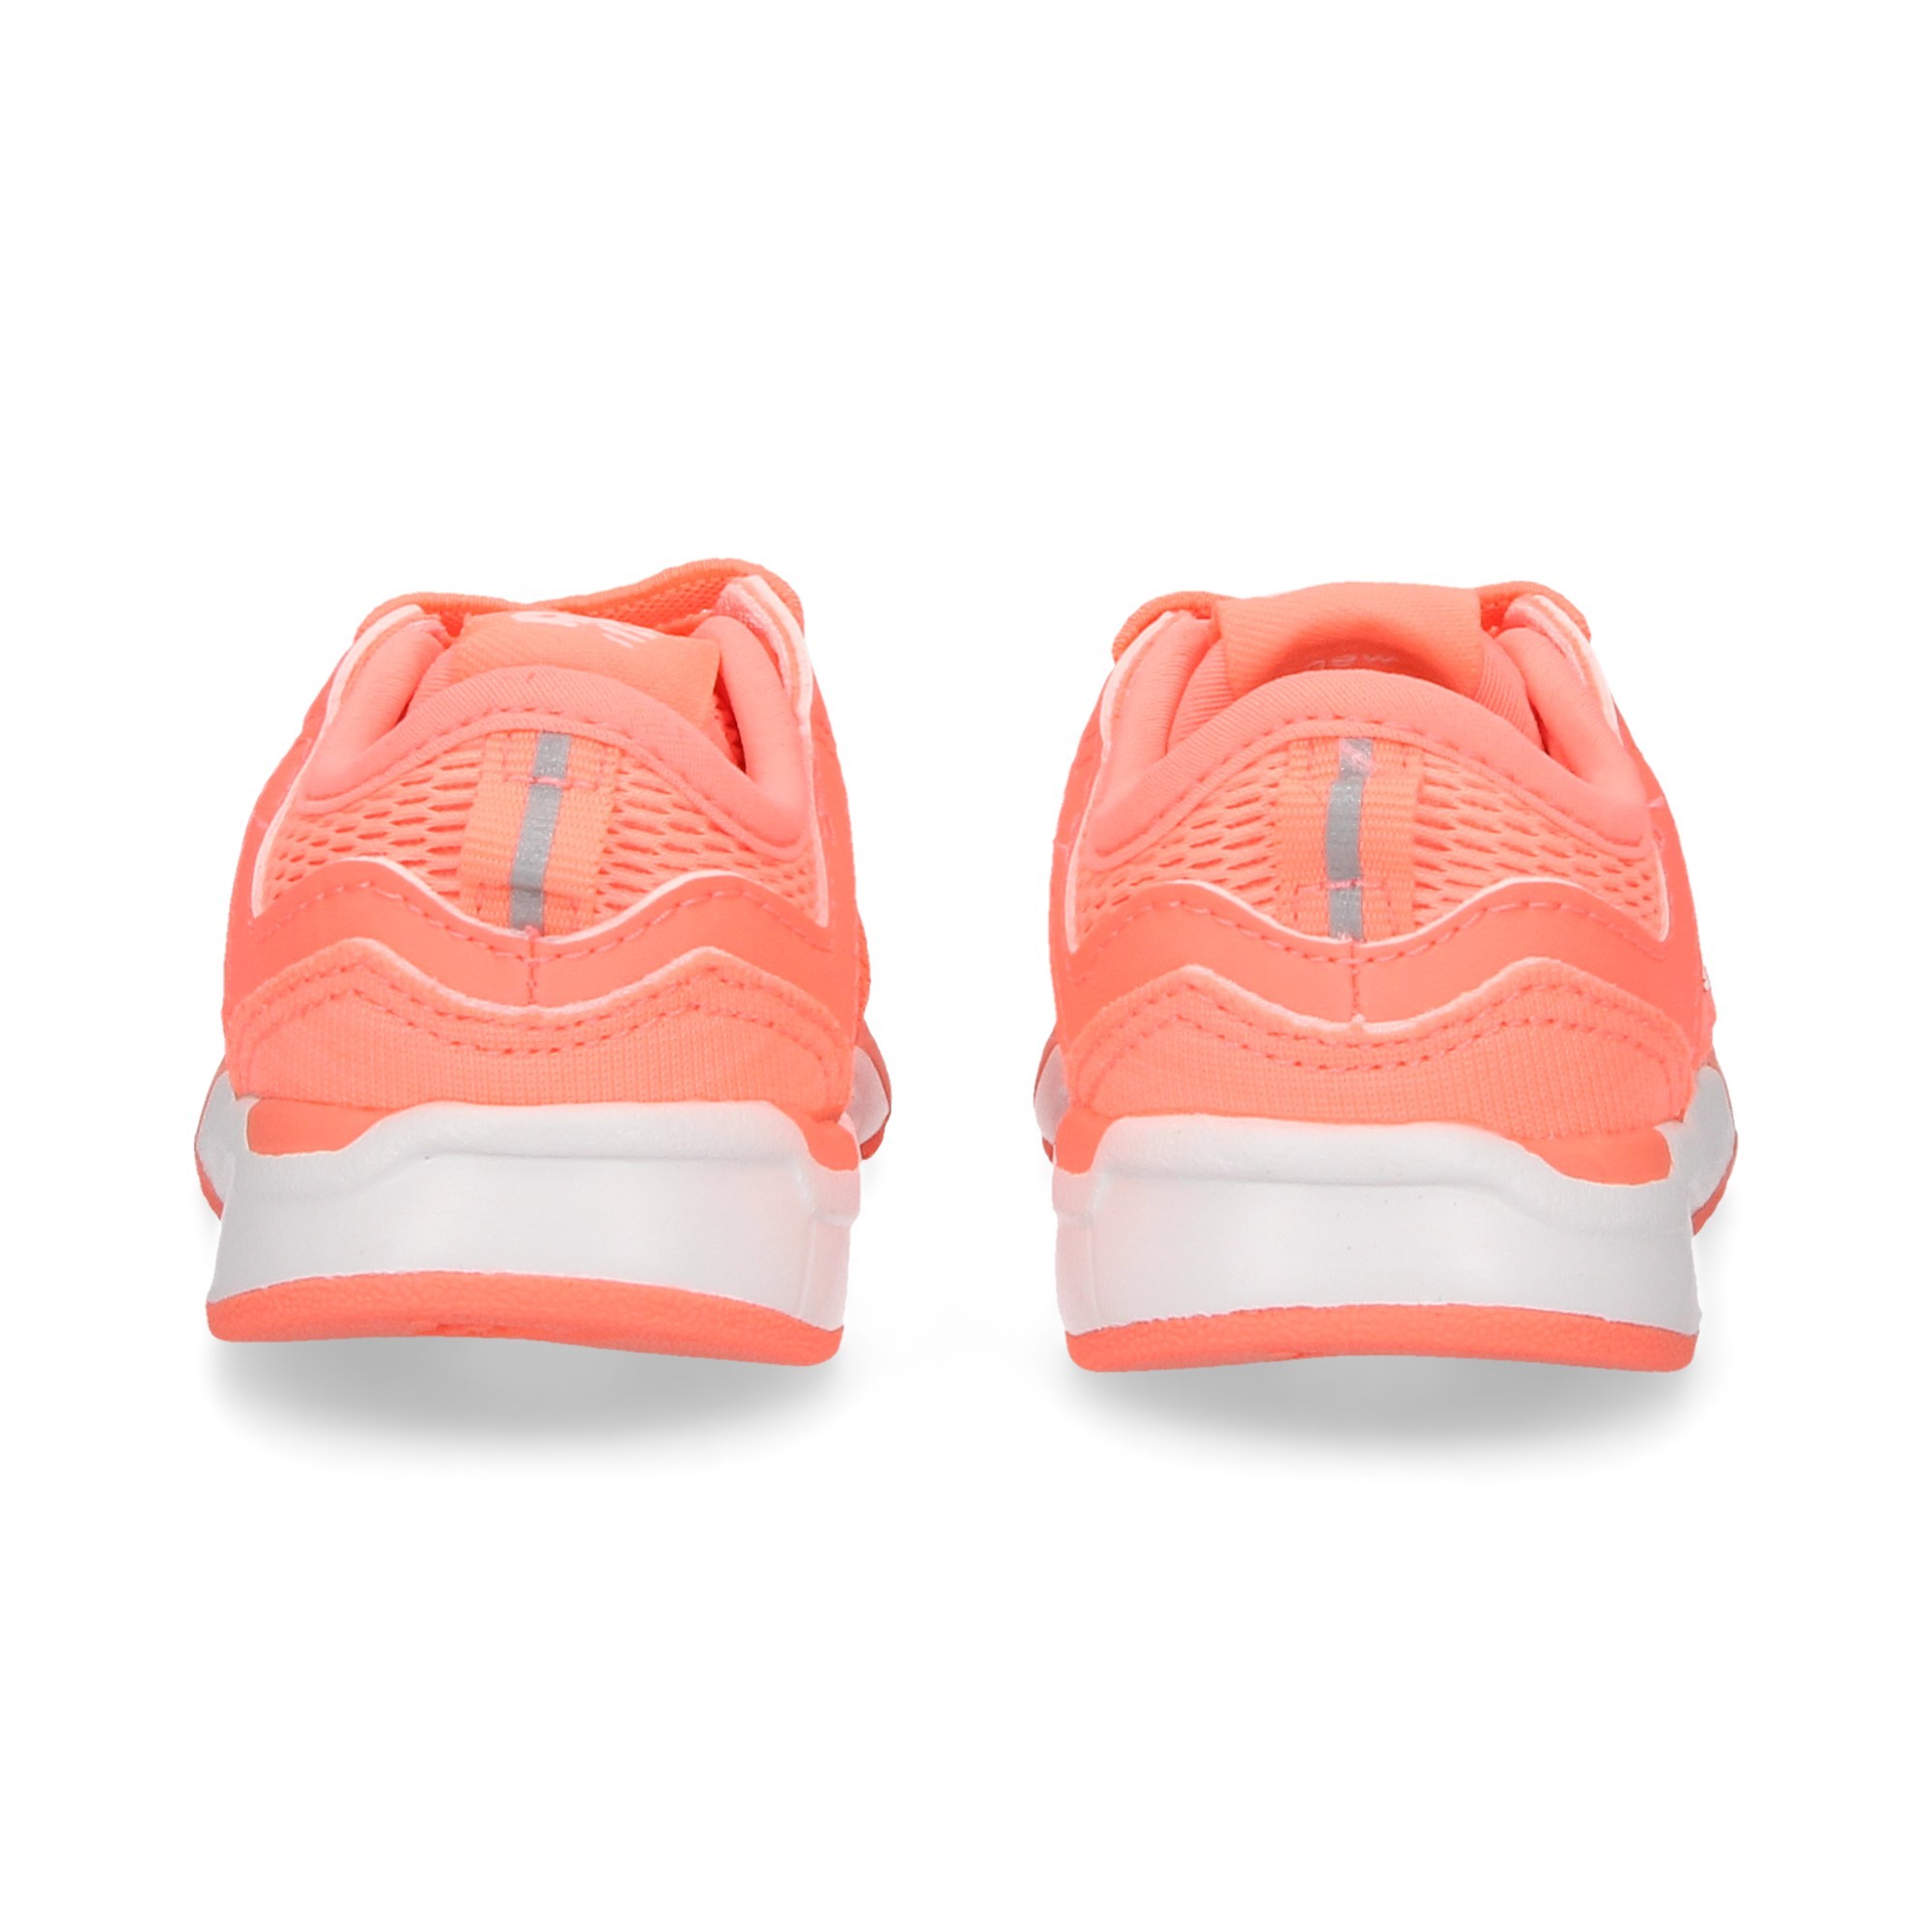 CORAIL SPORTIF / MAILLE BLANCHE